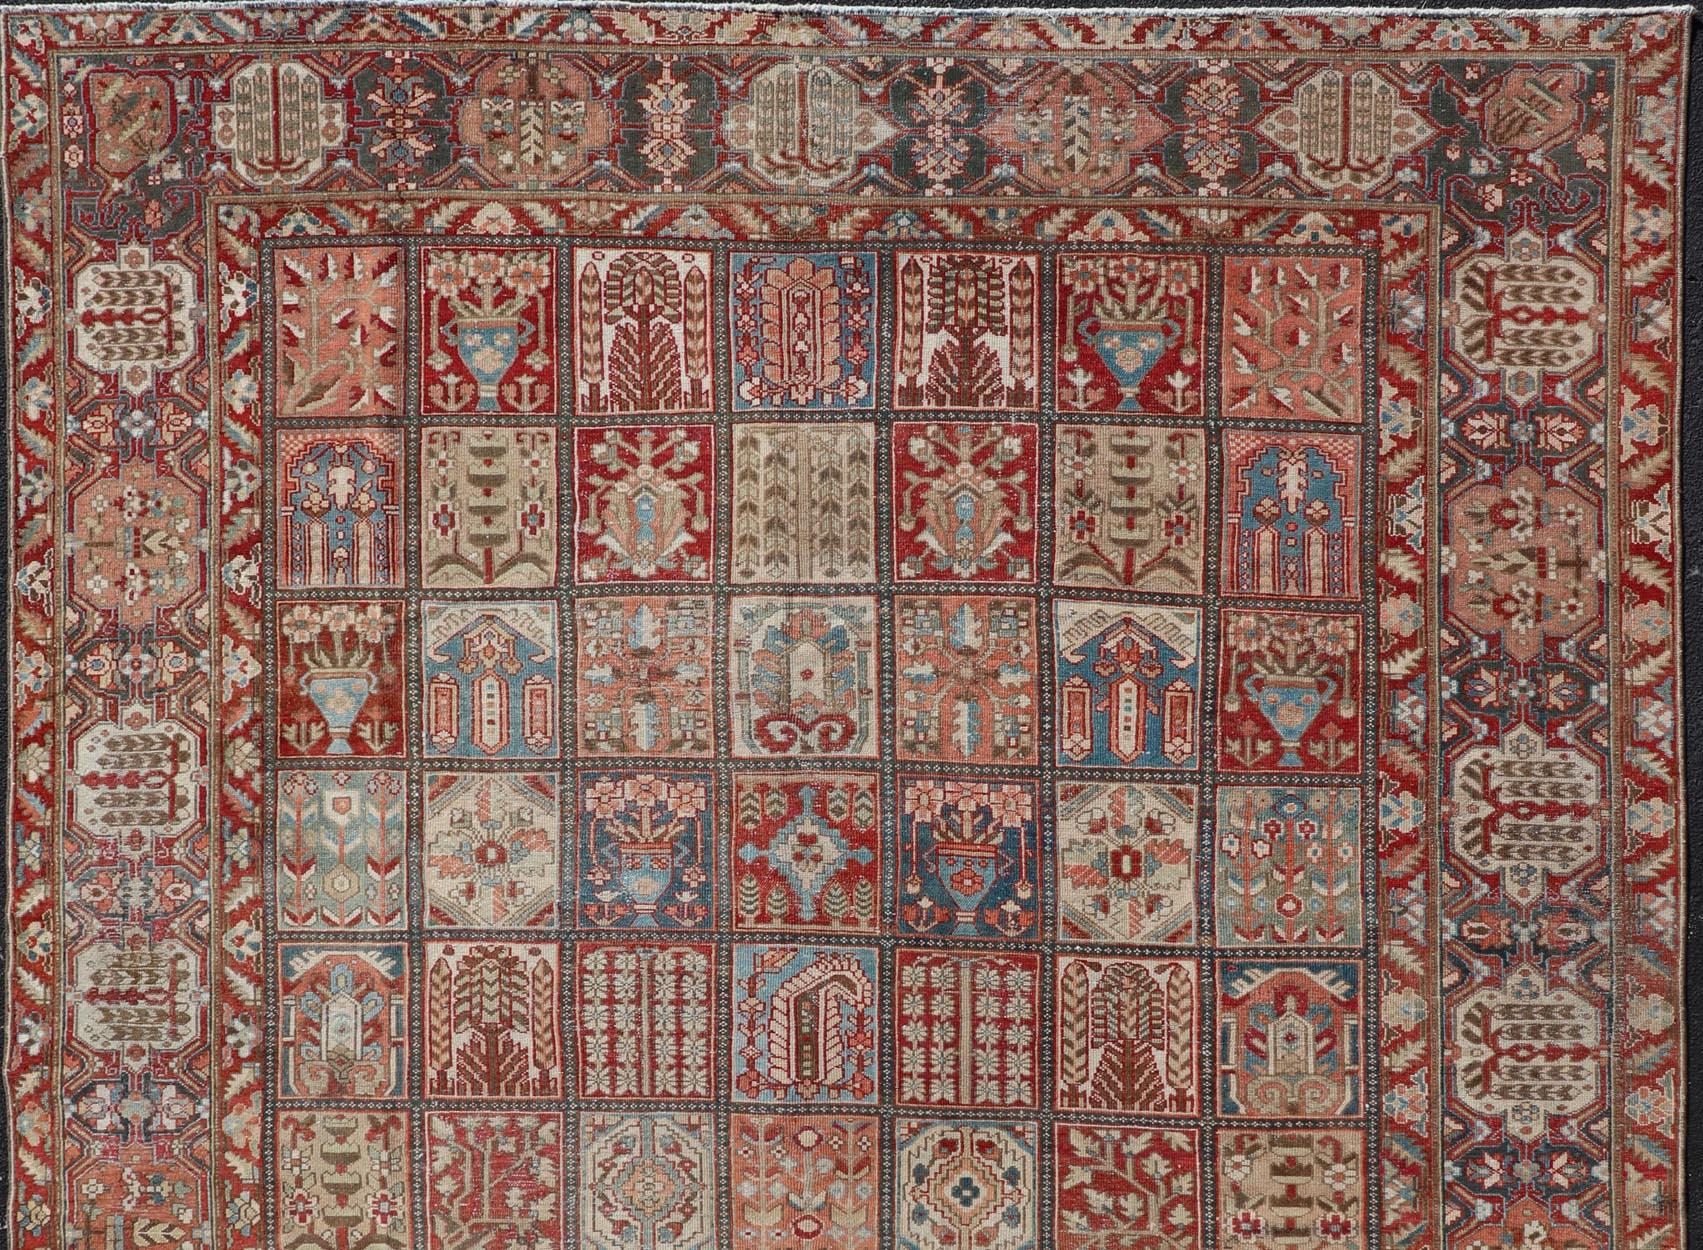 Tribal Square Persian Large Bakhtiari Rug with All-Over Garden Design in Muted Colors For Sale